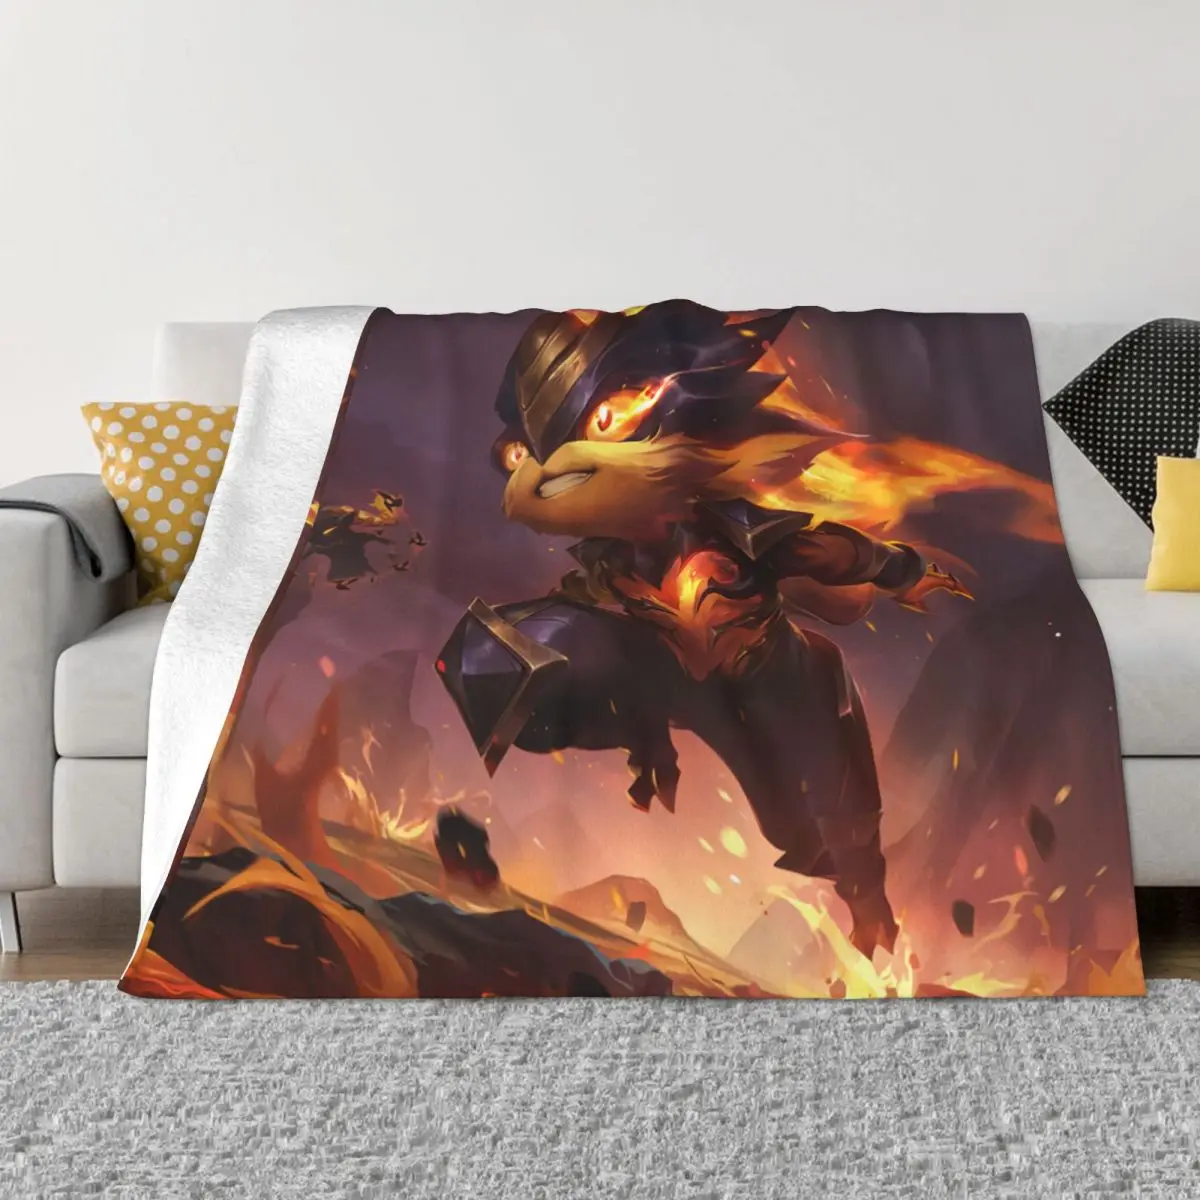 

LOL League of Legends Game Blankets Coral Fleece Plush Decoration Bedroom Bedding Couch Bedspread